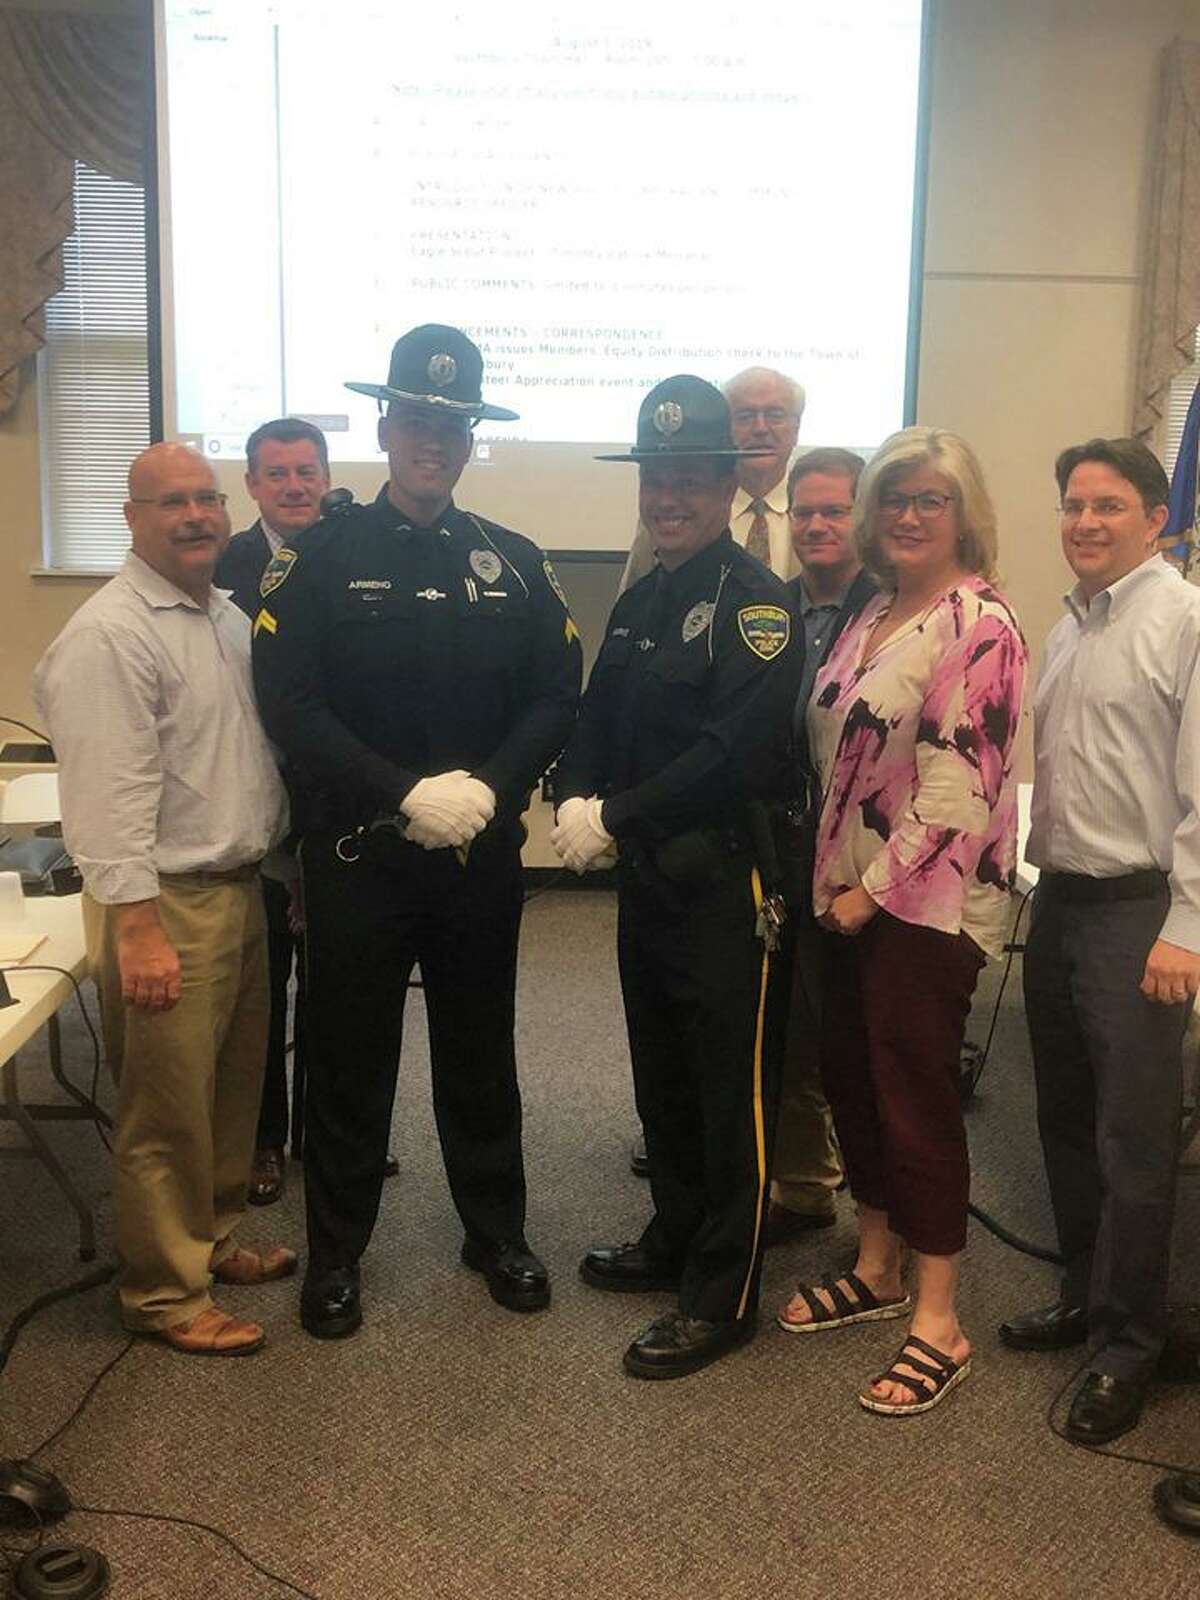 Officer Anthony Armeno, left, was promoted to corporal and Officer Robert Burke, right, will be the new Heritage Village Community Resource Officer. Both are pictured with the Board of Selectmen at the Aug. 1 Board of Selectmen meeting in Southbury, Conn.